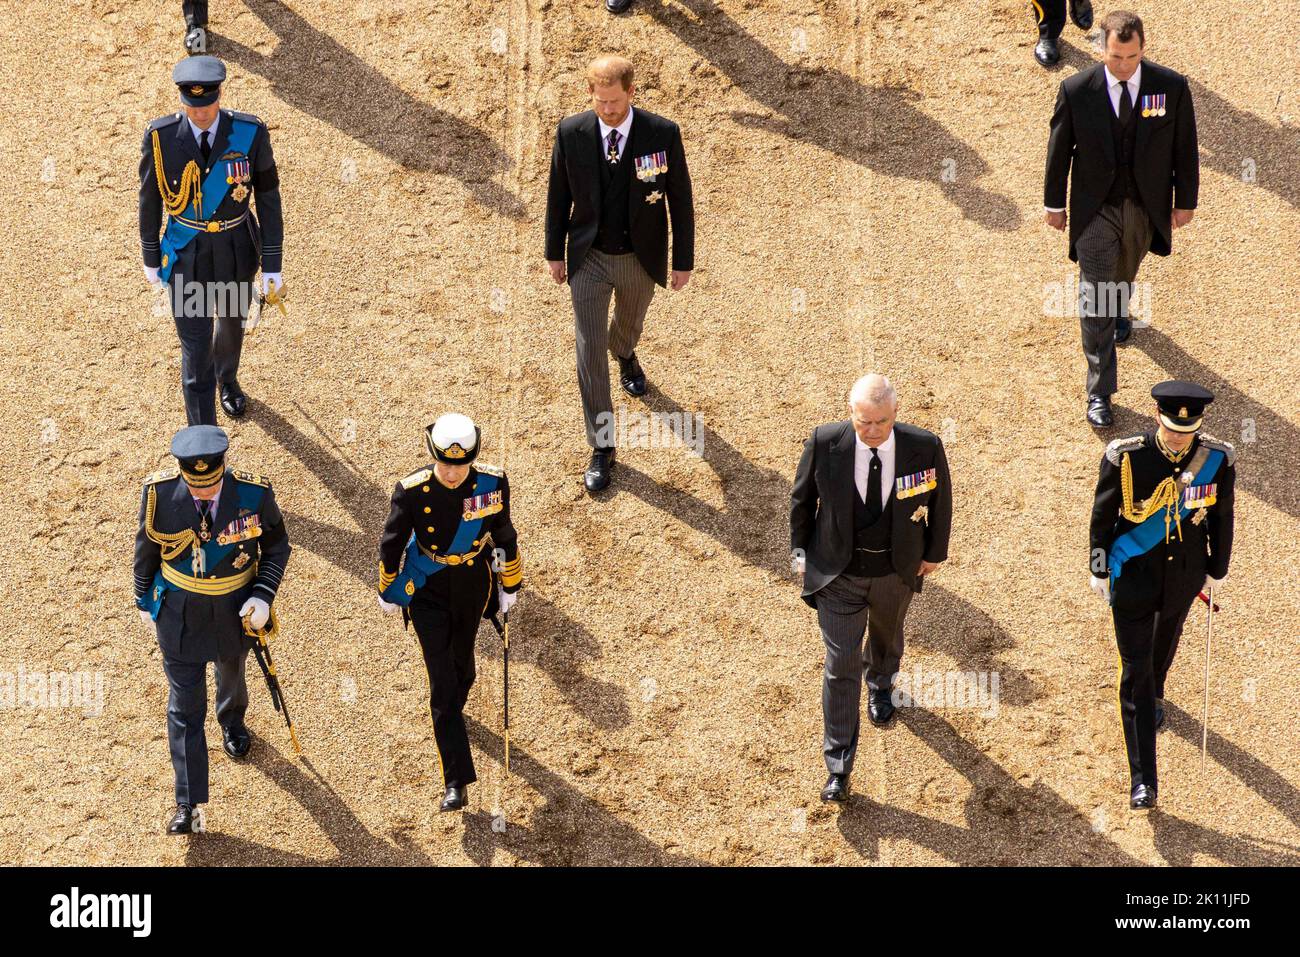 Britain's Prince William, Prince of Wales, Britain's King Charles III, Britain's Prince Harry, Duke of Sussex, Britain's Princess Anne, Princess Royal, and Vice Admiral Timothy Laurence walk behind the coffin of Queen Elizabeth II, during a procession from Buckingham Palace to the Palace of Westminster, in London on Wednesday on September 14, 2022, where the coffin of Queen Elizabeth II, will Lie in State. Queen Elizabeth II will lie in state in Westminster Hall inside the Palace of Westminster, from Wednesday until a few hours before her funeral on Monday, with huge queues expected to file pa Stock Photo